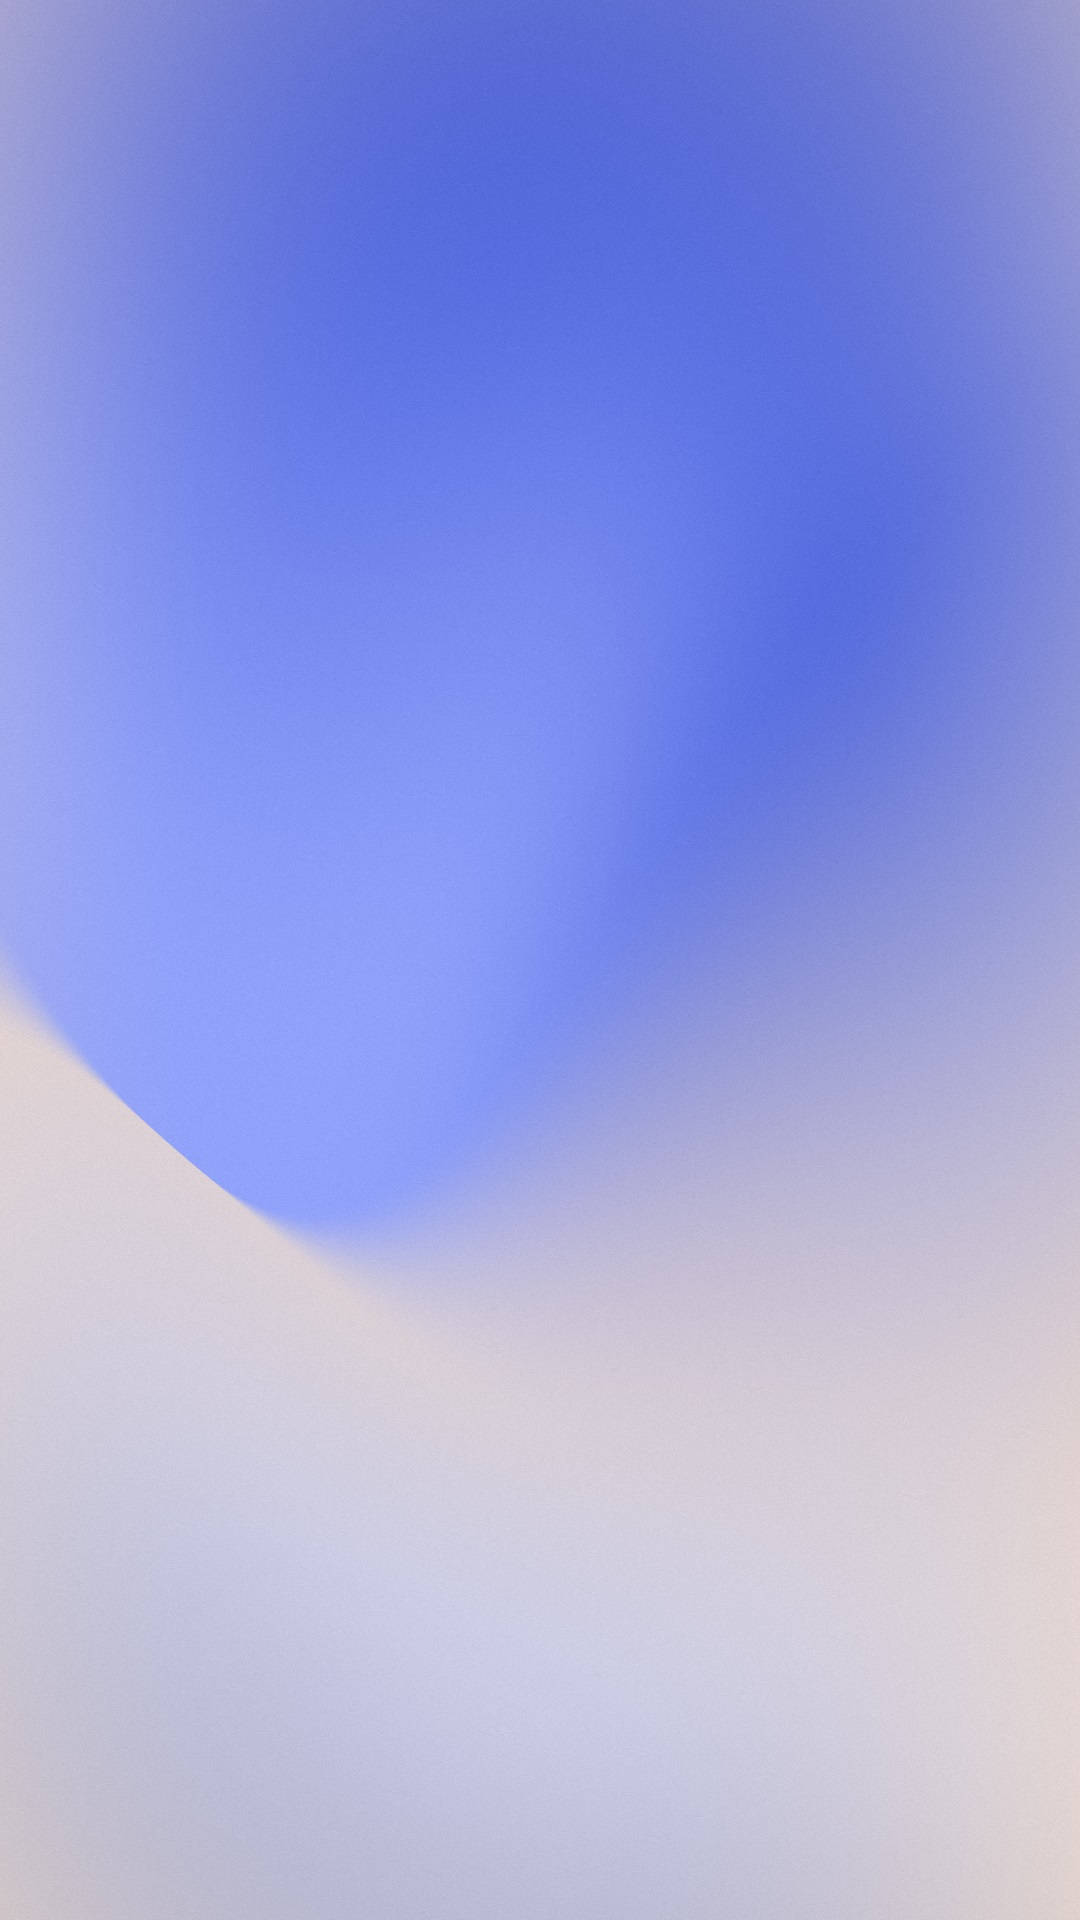 Google Pixel Blue And White Wallpaper